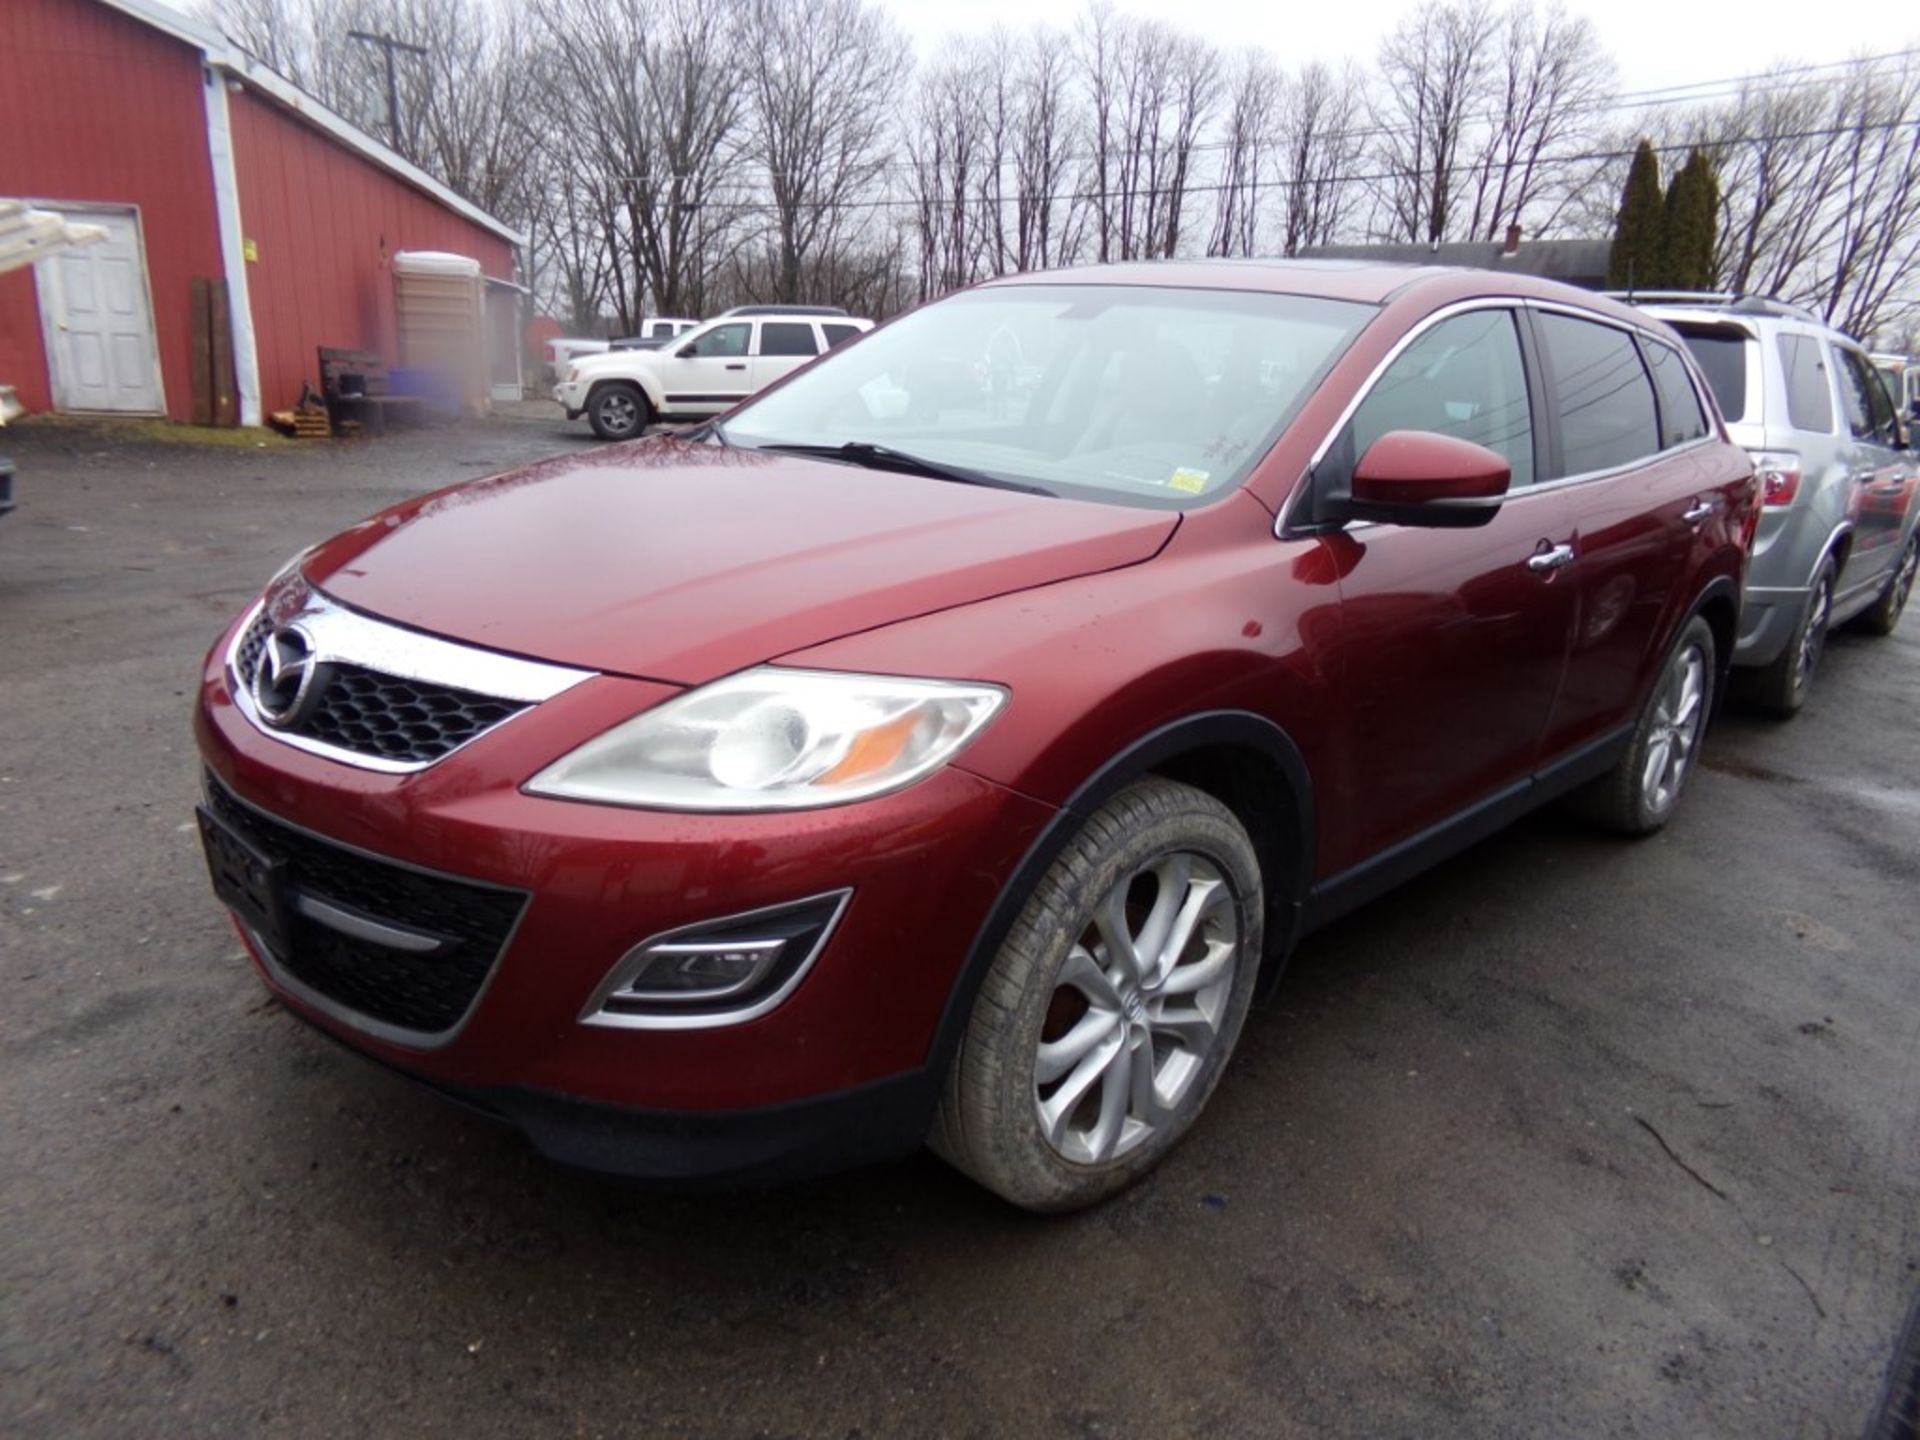 2011 Mazda CX9, AWD, Auto, Maroon, Heated Leather Seats, Sunroof, Navigation, Has New Tires,